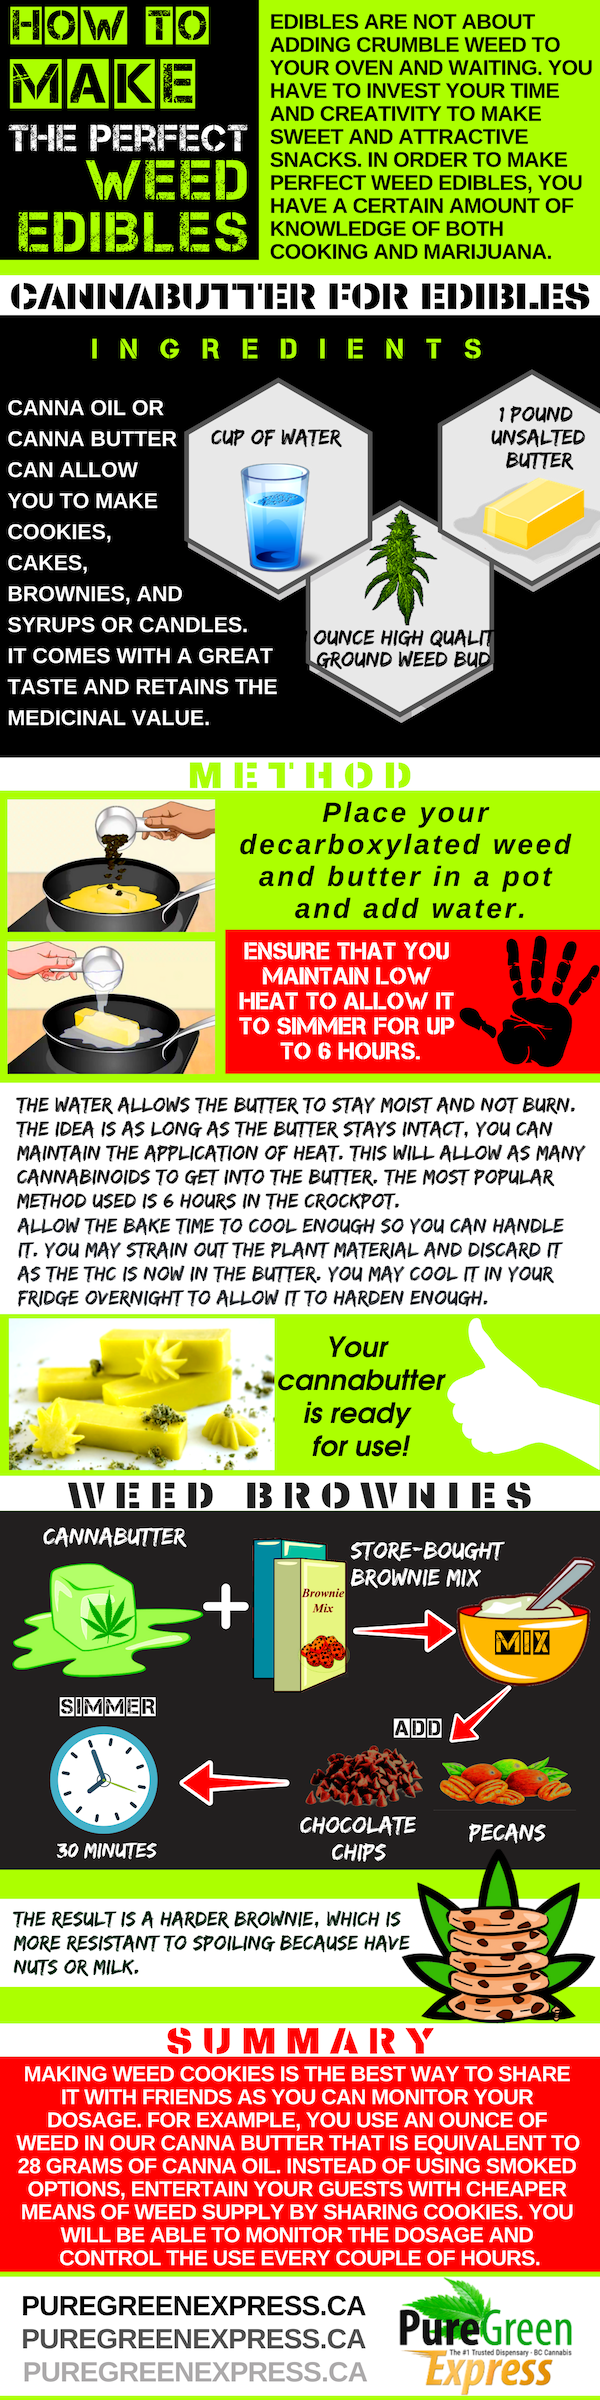 How to Make the Perfect Weed Edibles